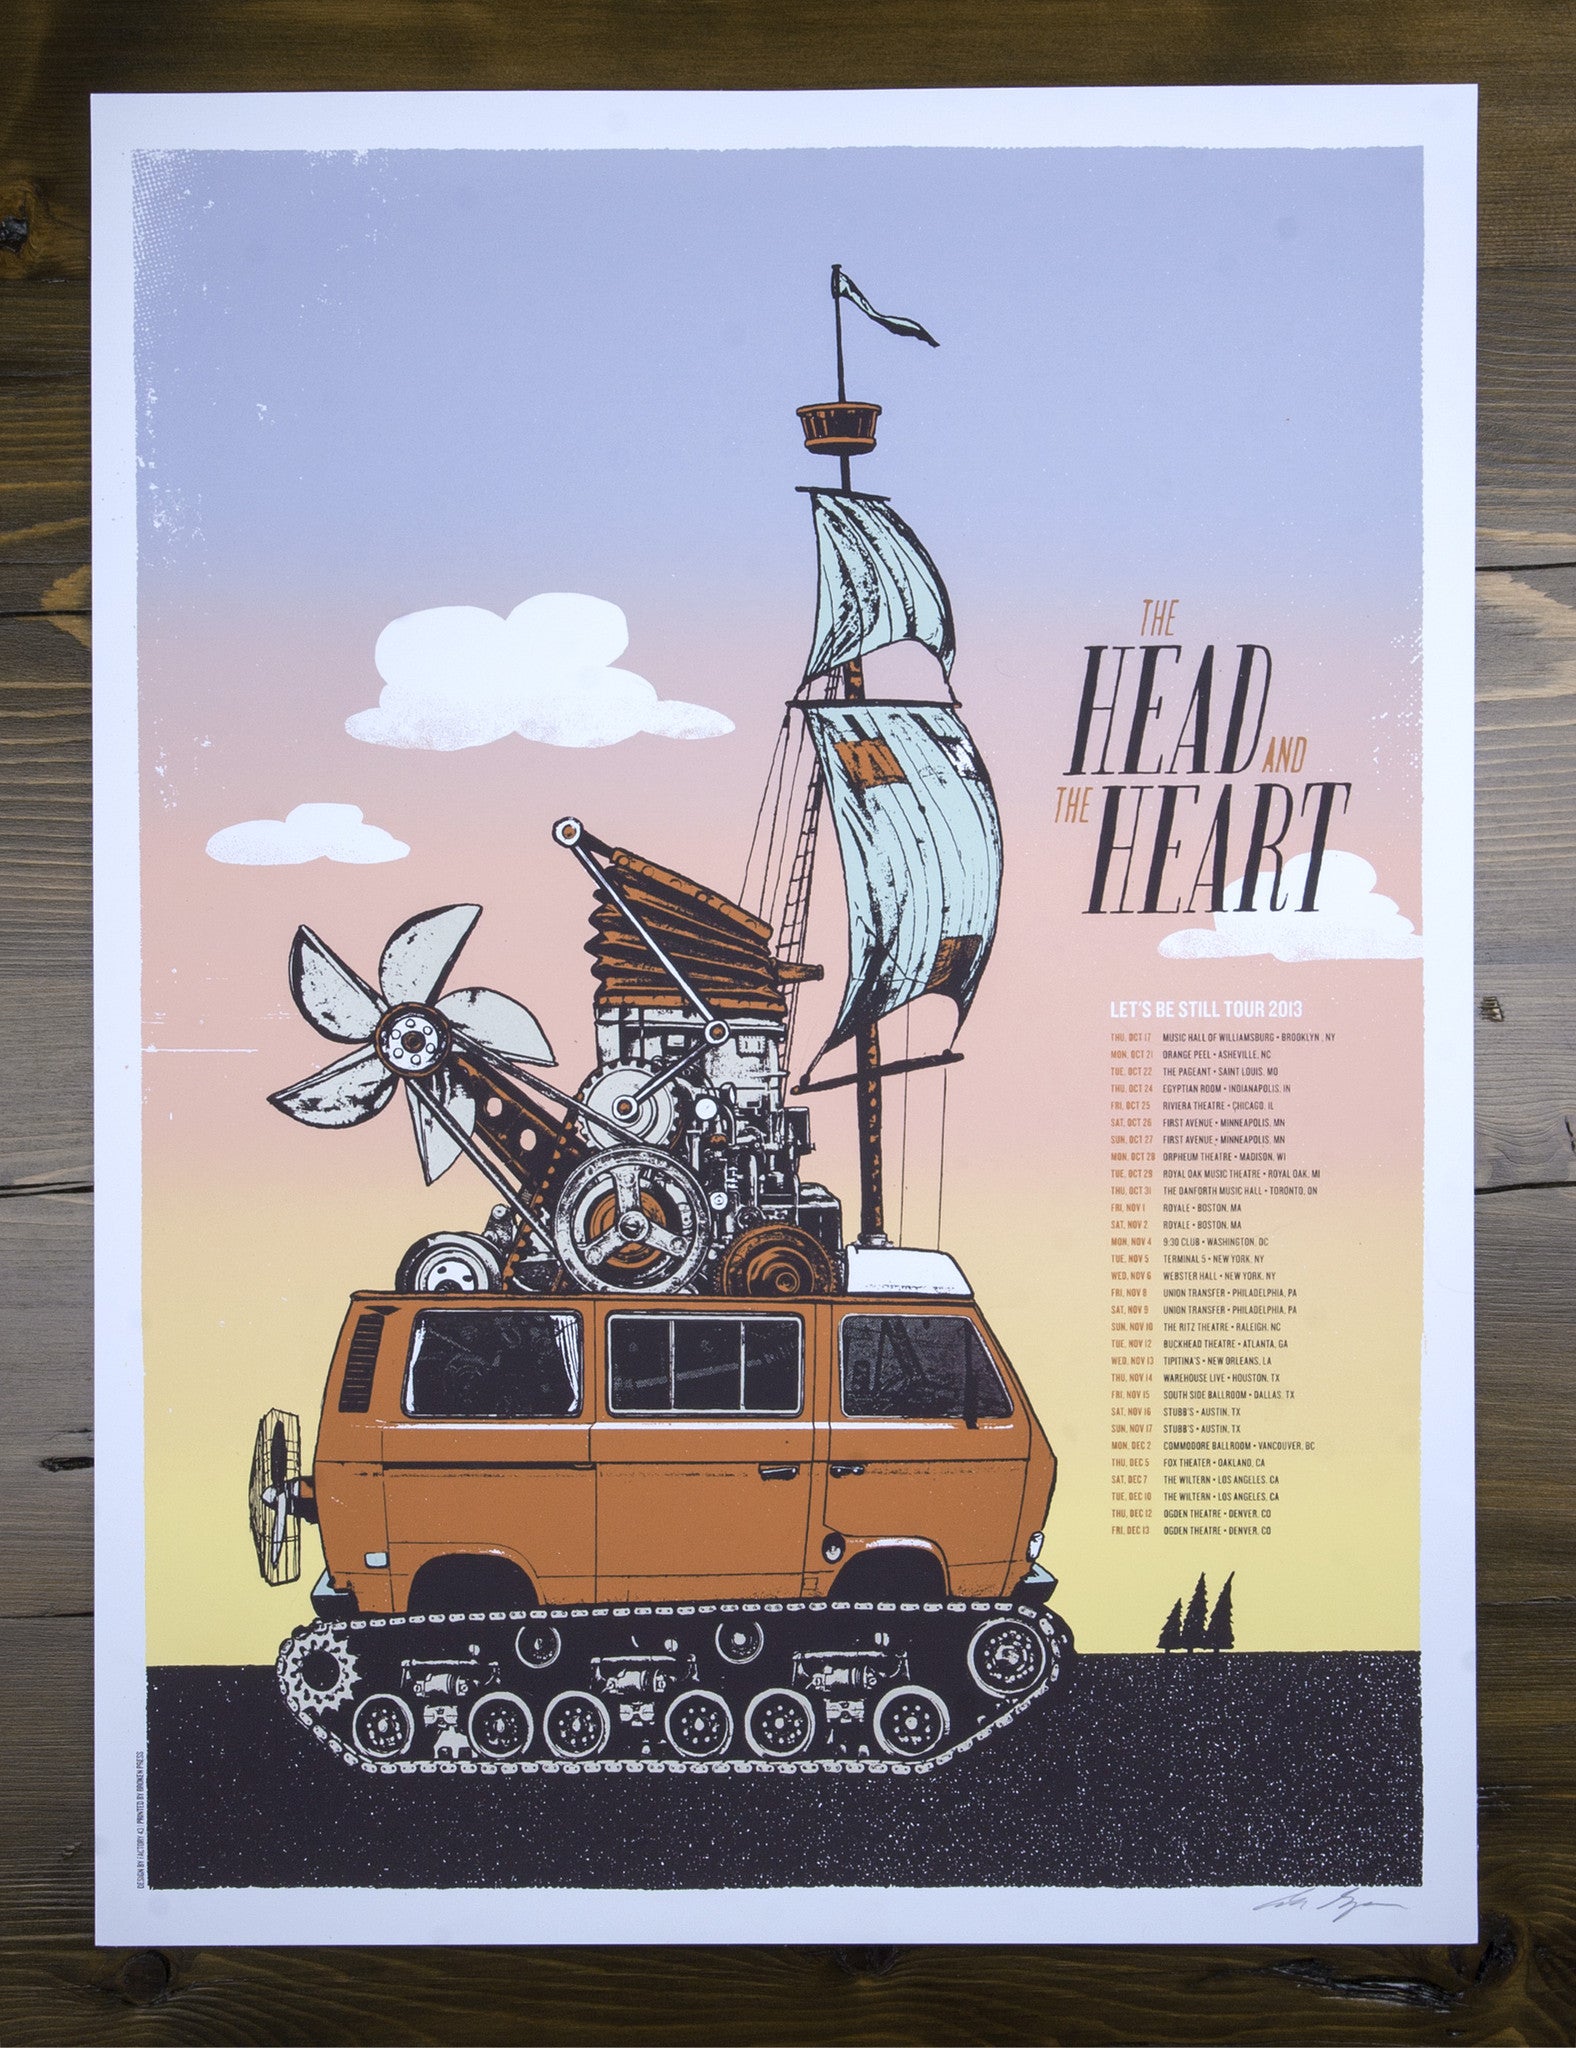 The Head and the Heart - Let's Be Still - Tour Poster